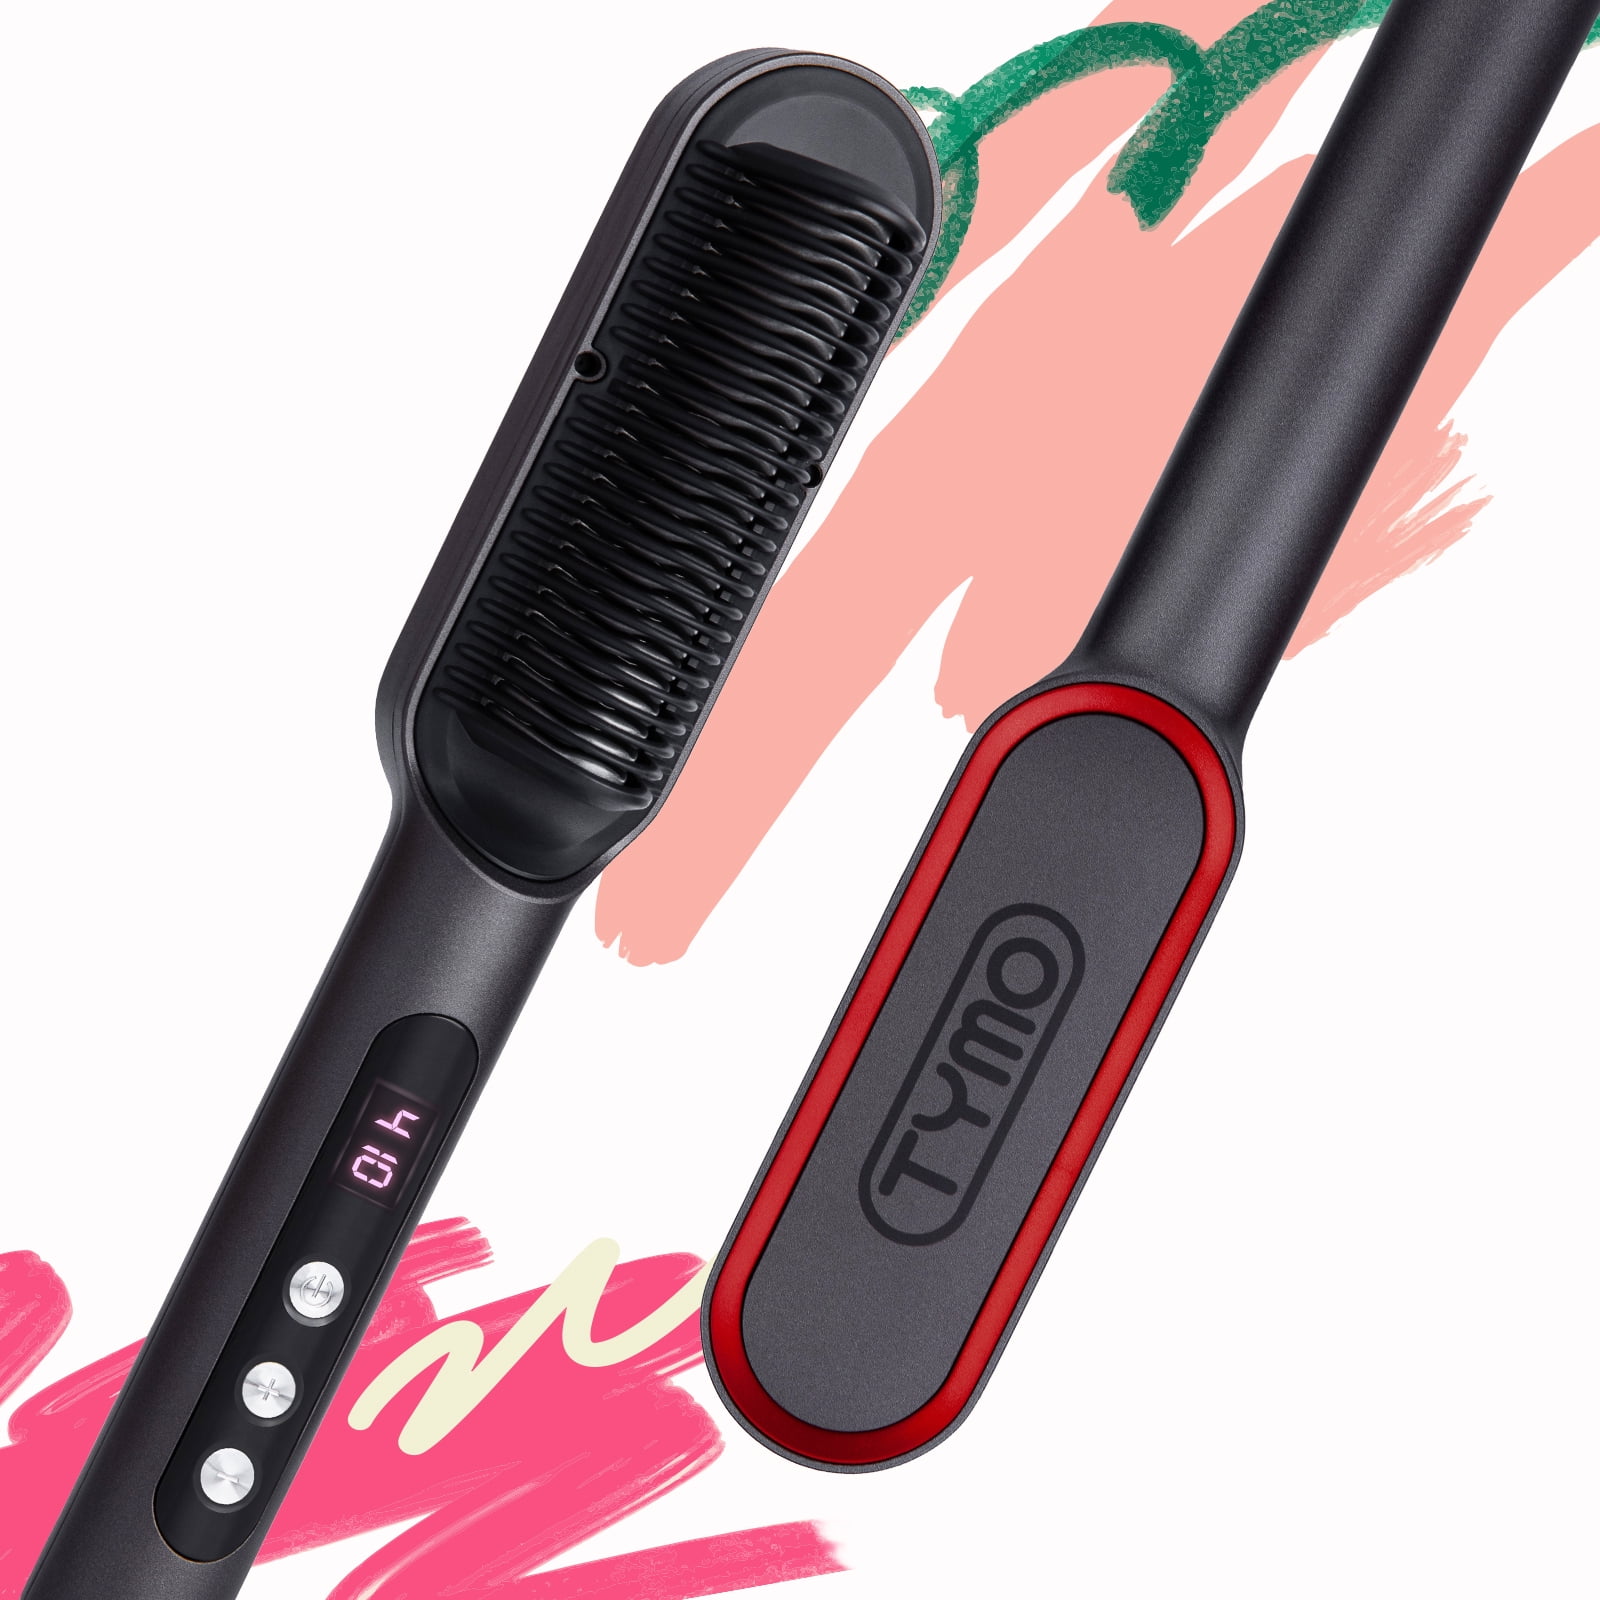 Buy TYMO RING PLUS Ionic Hair Straightener Comb - Hair Straightening Brush  & Iron with 9 Temperature Settings & LED Screen, Professional Hair Tools  for Styling Online at Lowest Price in Ubuy